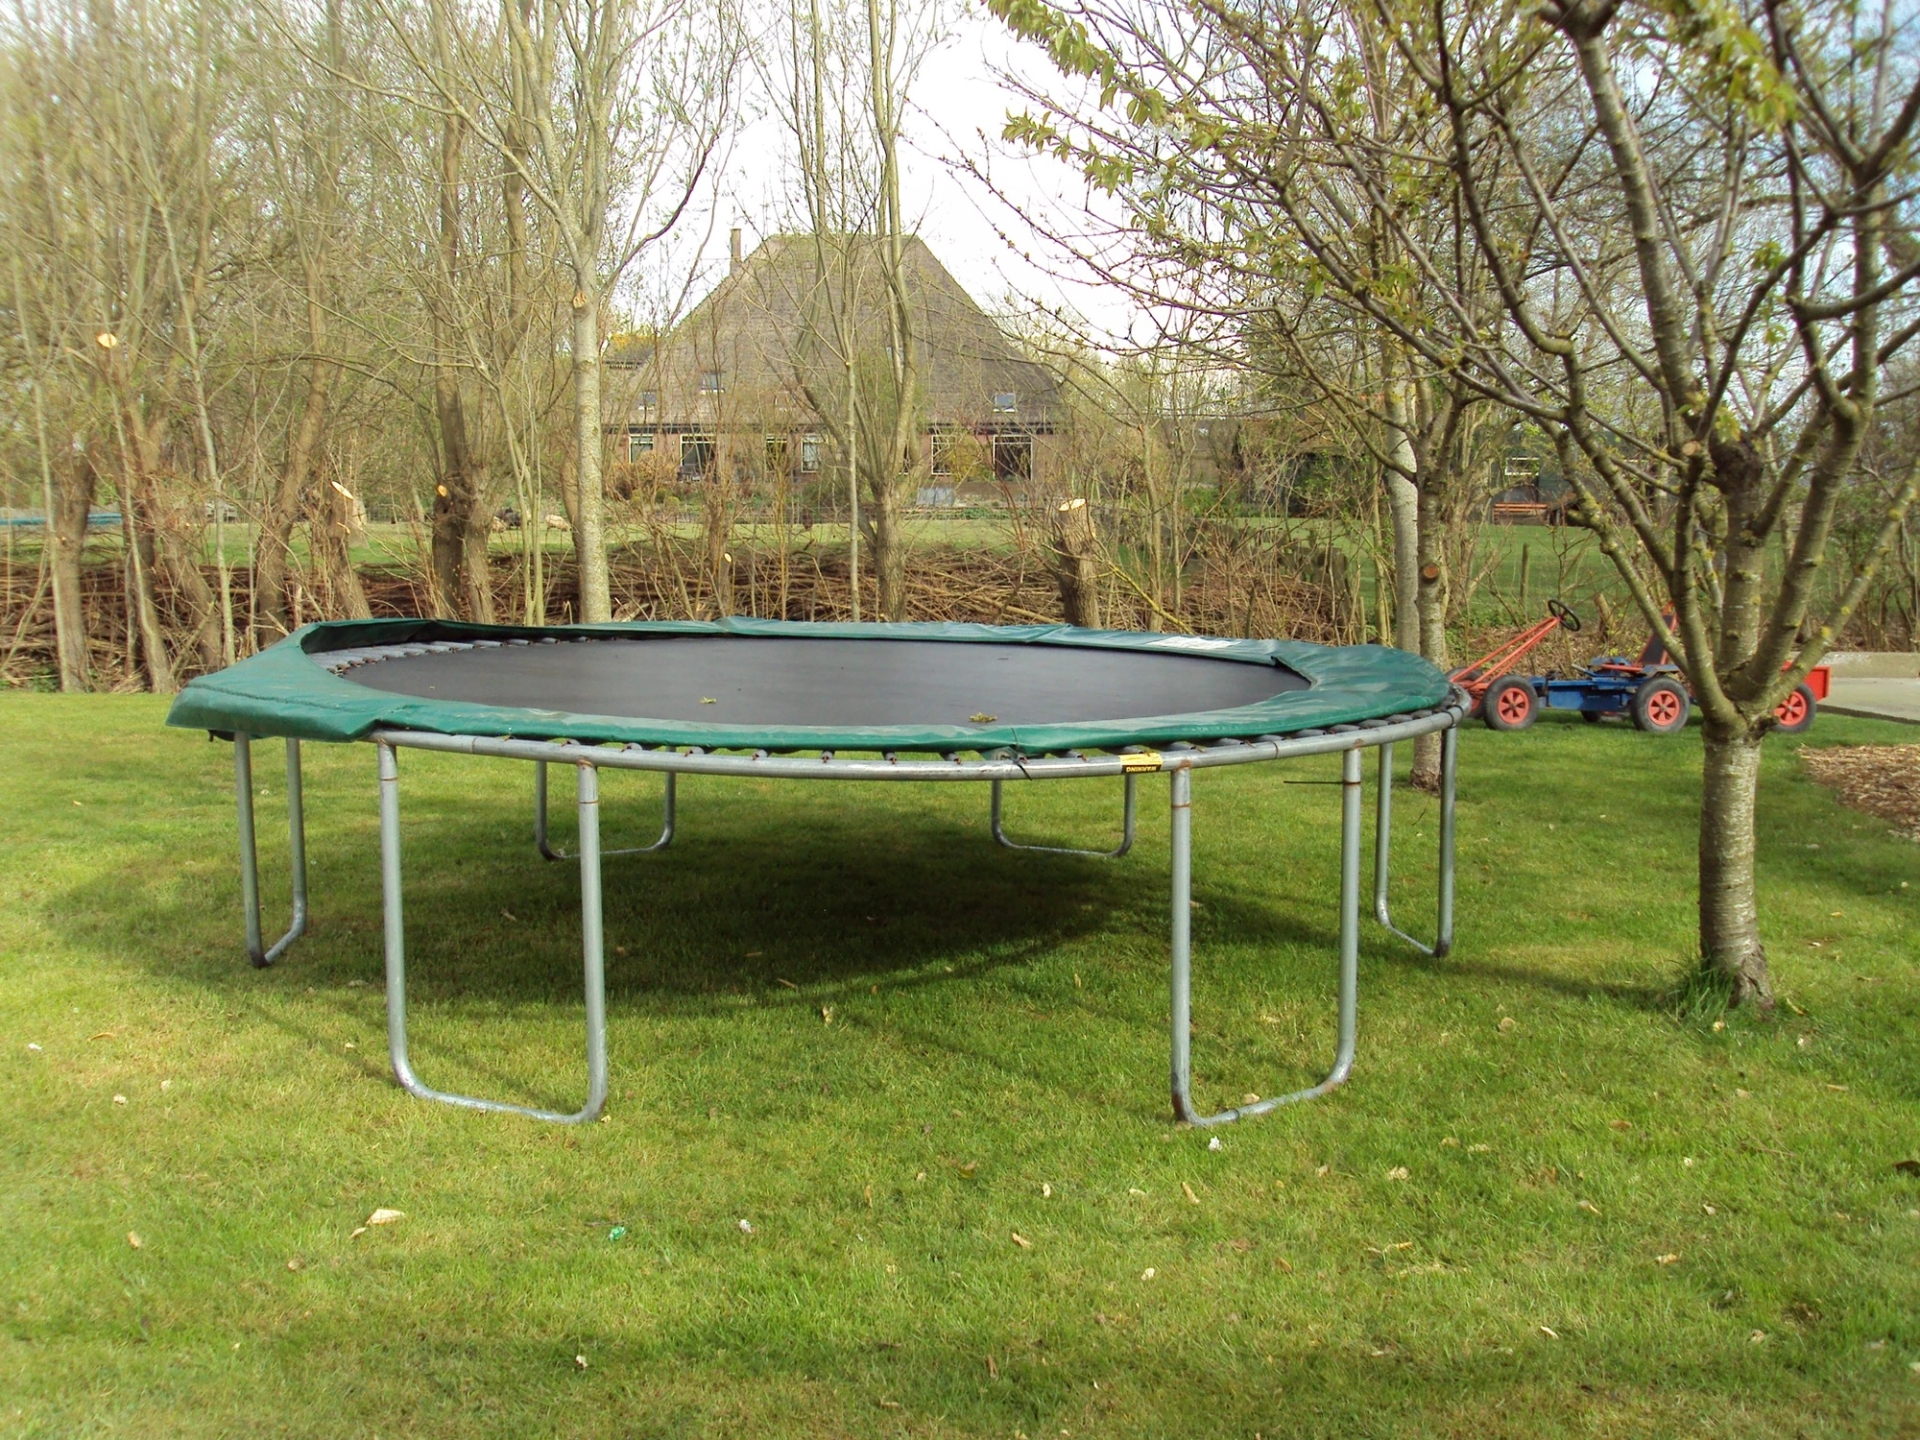 Nearly every garden we saw has a trampoline – compensation for an absence of nature-induced exhilaration.